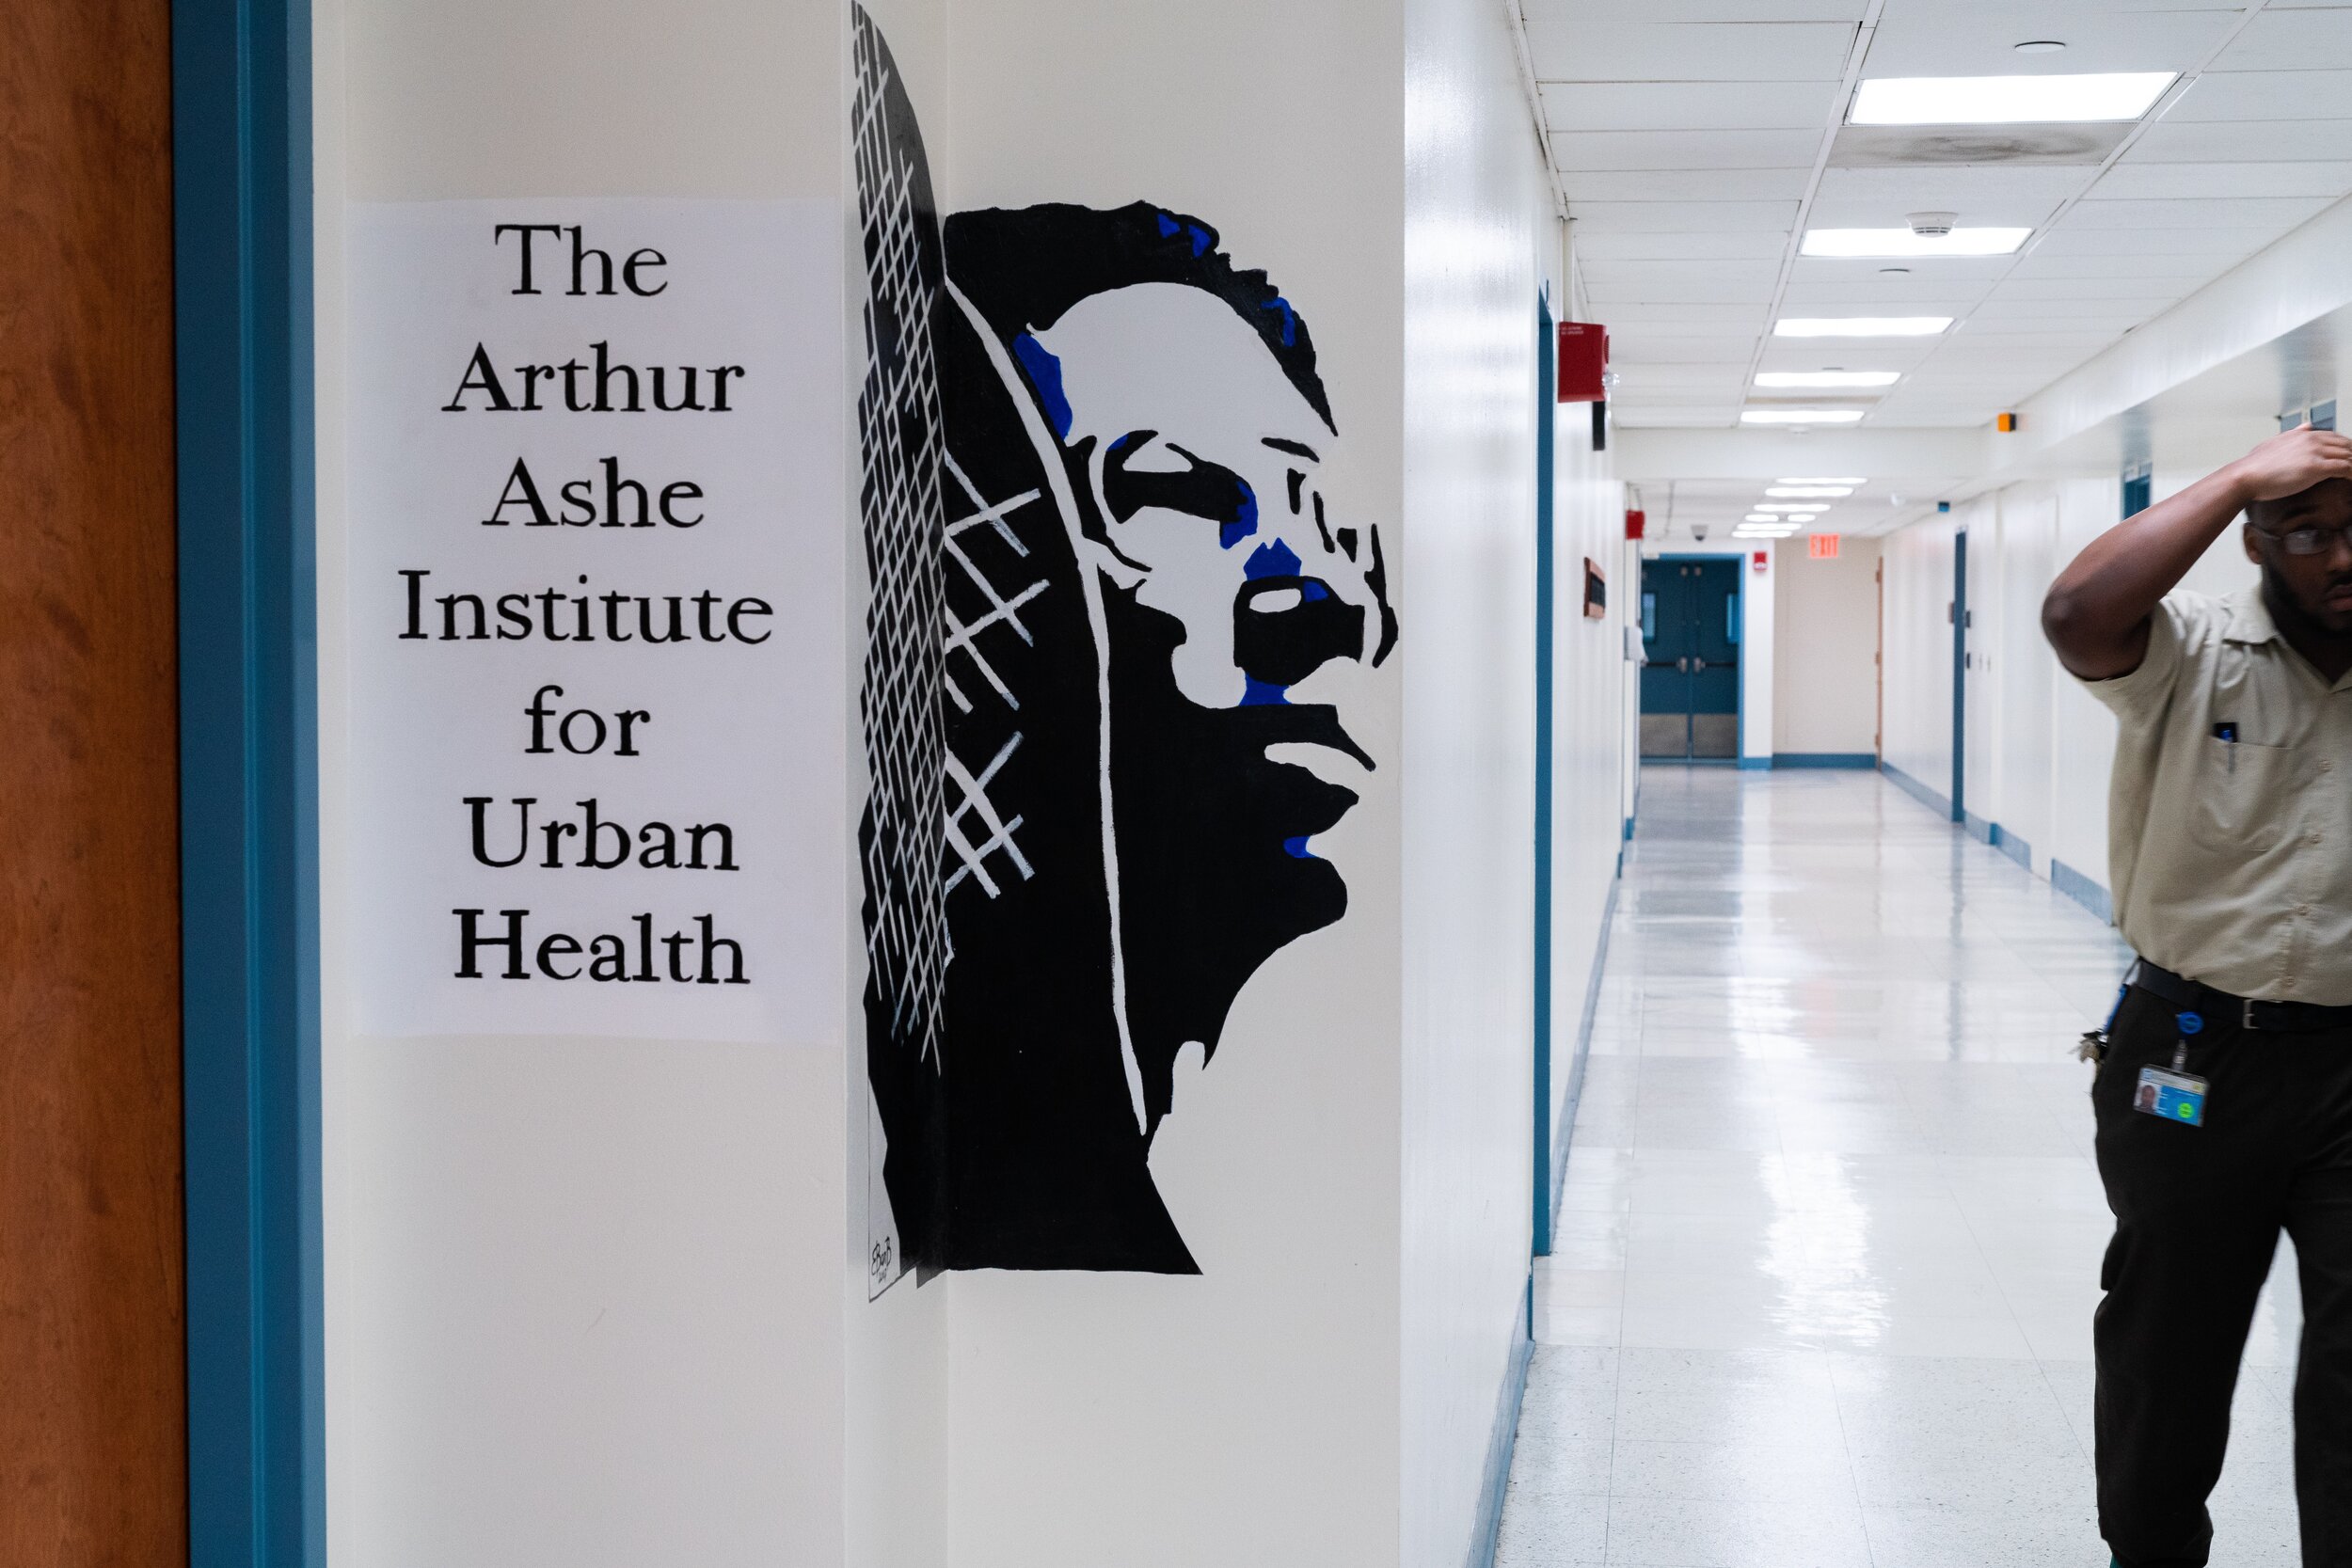   Legendary tennis star Arthur Ashe founded the Arthur Ashe Institute for Urban Health in 1992 to address healthcare disparities in low-income and urban communities. Housed at SUNY Downstate Medical Center, the Institute continues Ashe’s work across 